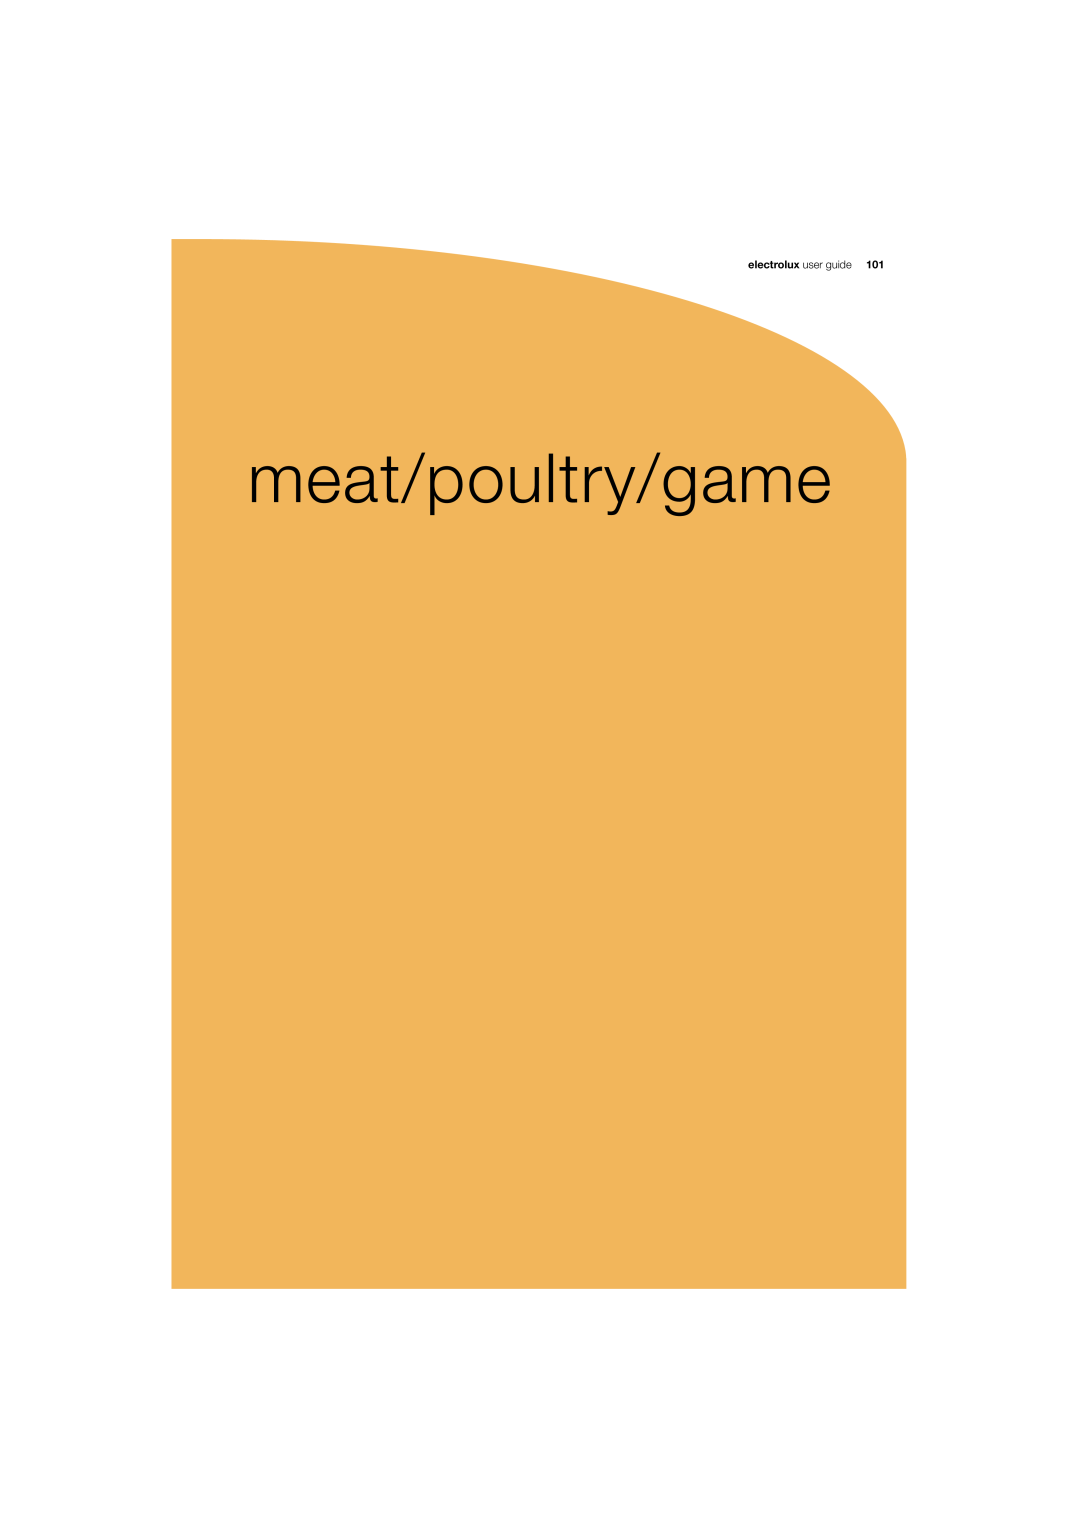 Electrolux 180 manual meat/poultry/game, electrolux user guide 